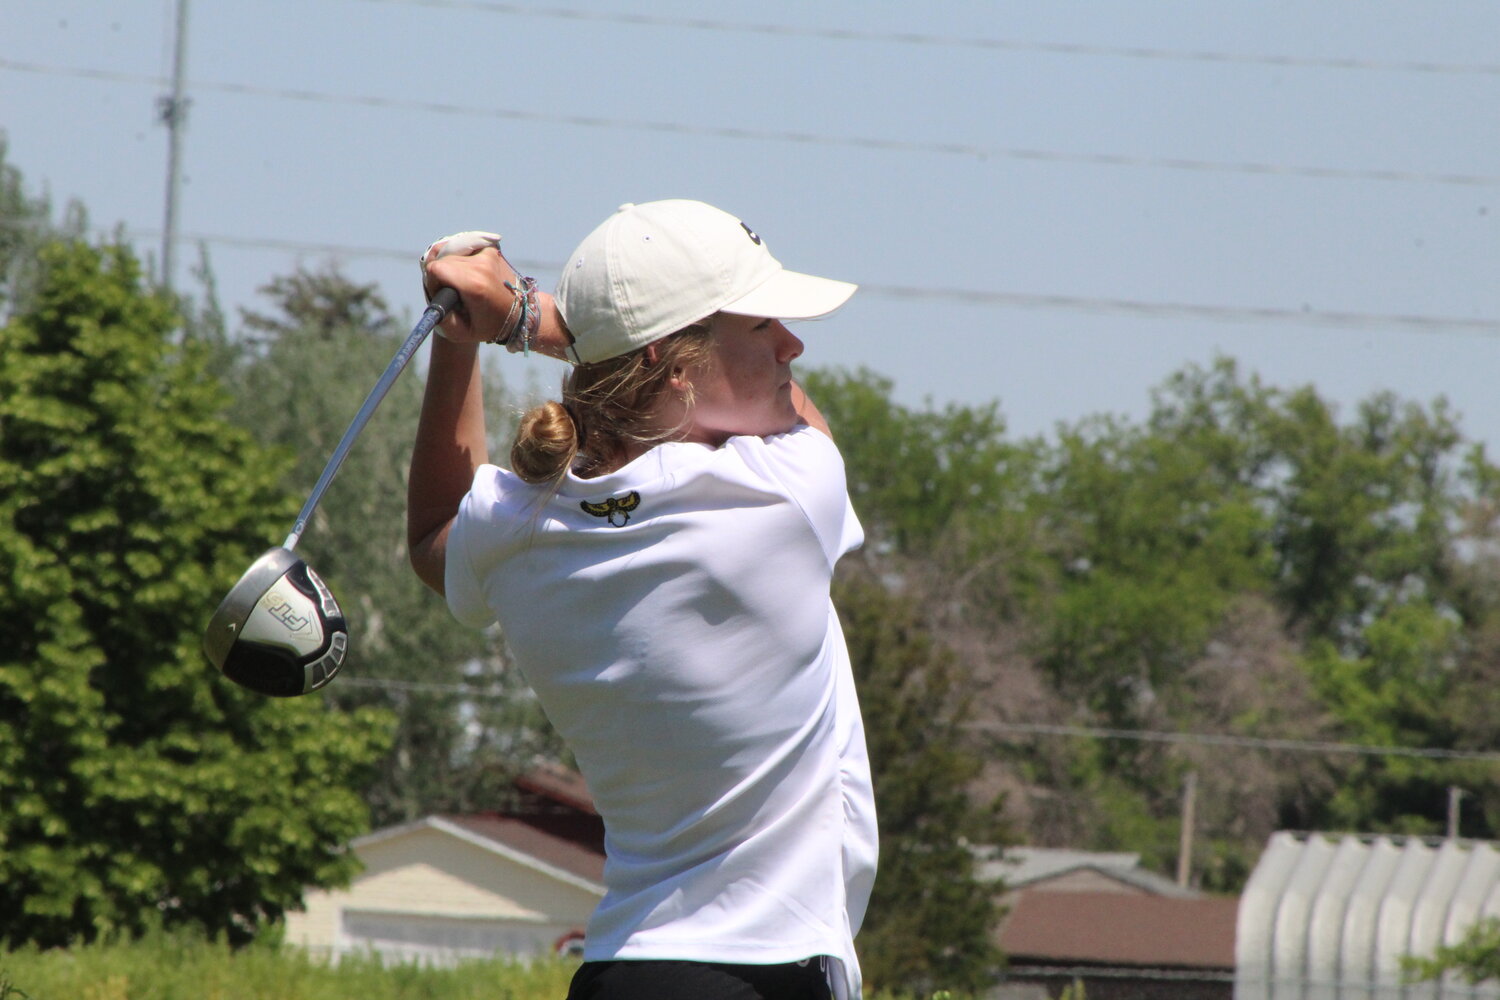 In just her second year of high school golf, Kylie Reinier of Mid-Prairie cracked the top 20 at the 2A state tournament.